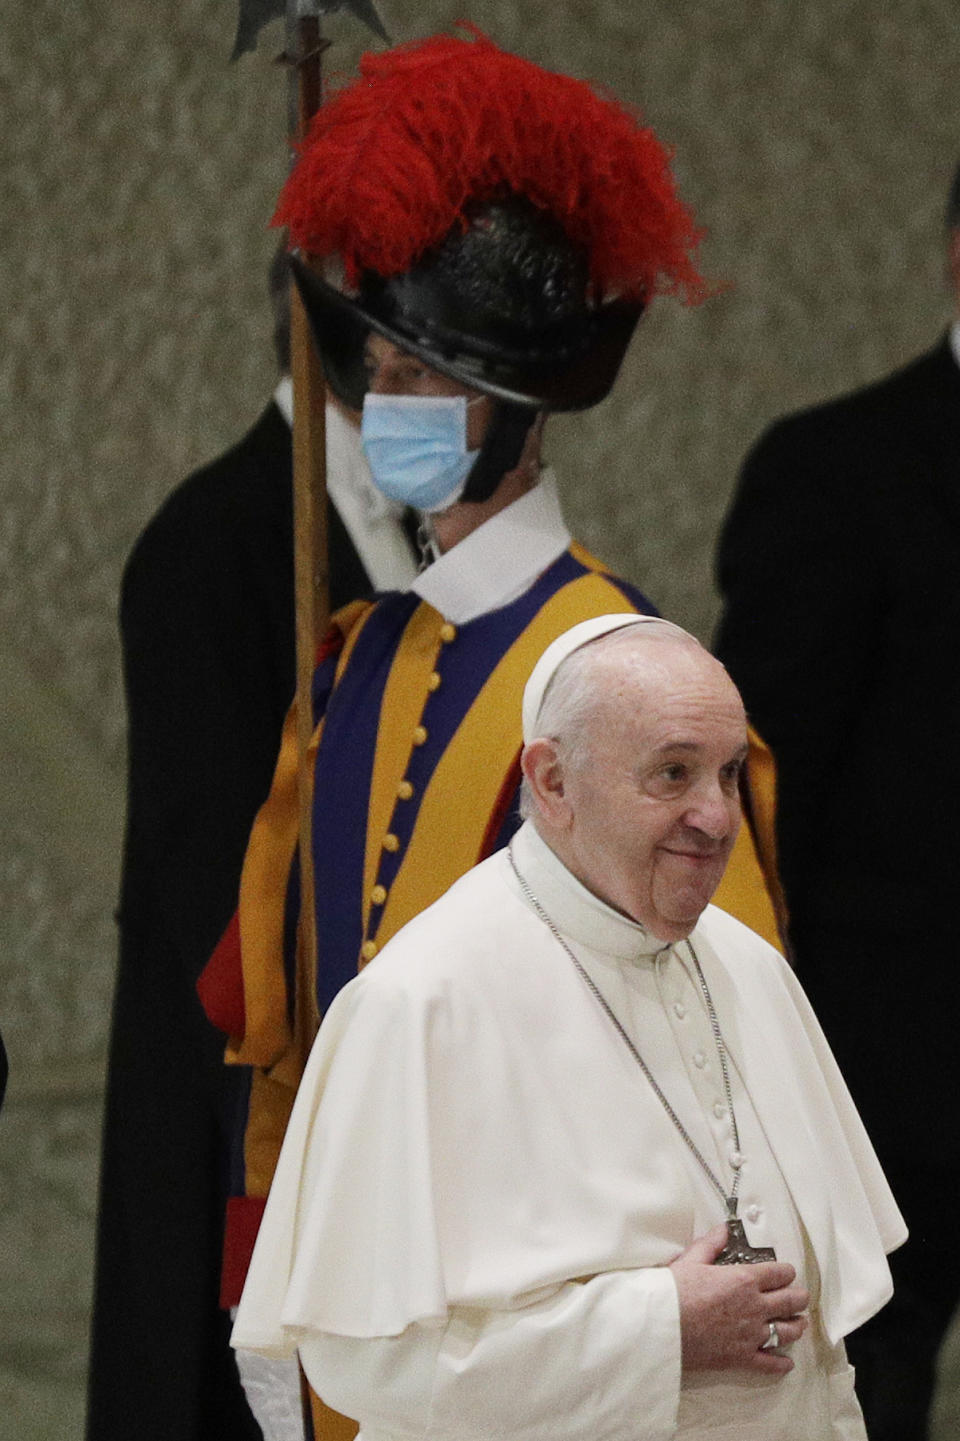 Pope Francis passes by a Swiss guard wearing a face mask to curb the spread of COVID-19 as he arrives in the Paul VI hall on the occasion of the weekly general audience at the Vatican, Wednesday, Oct. 21, 2020. (AP Photo/Gregorio Borgia)